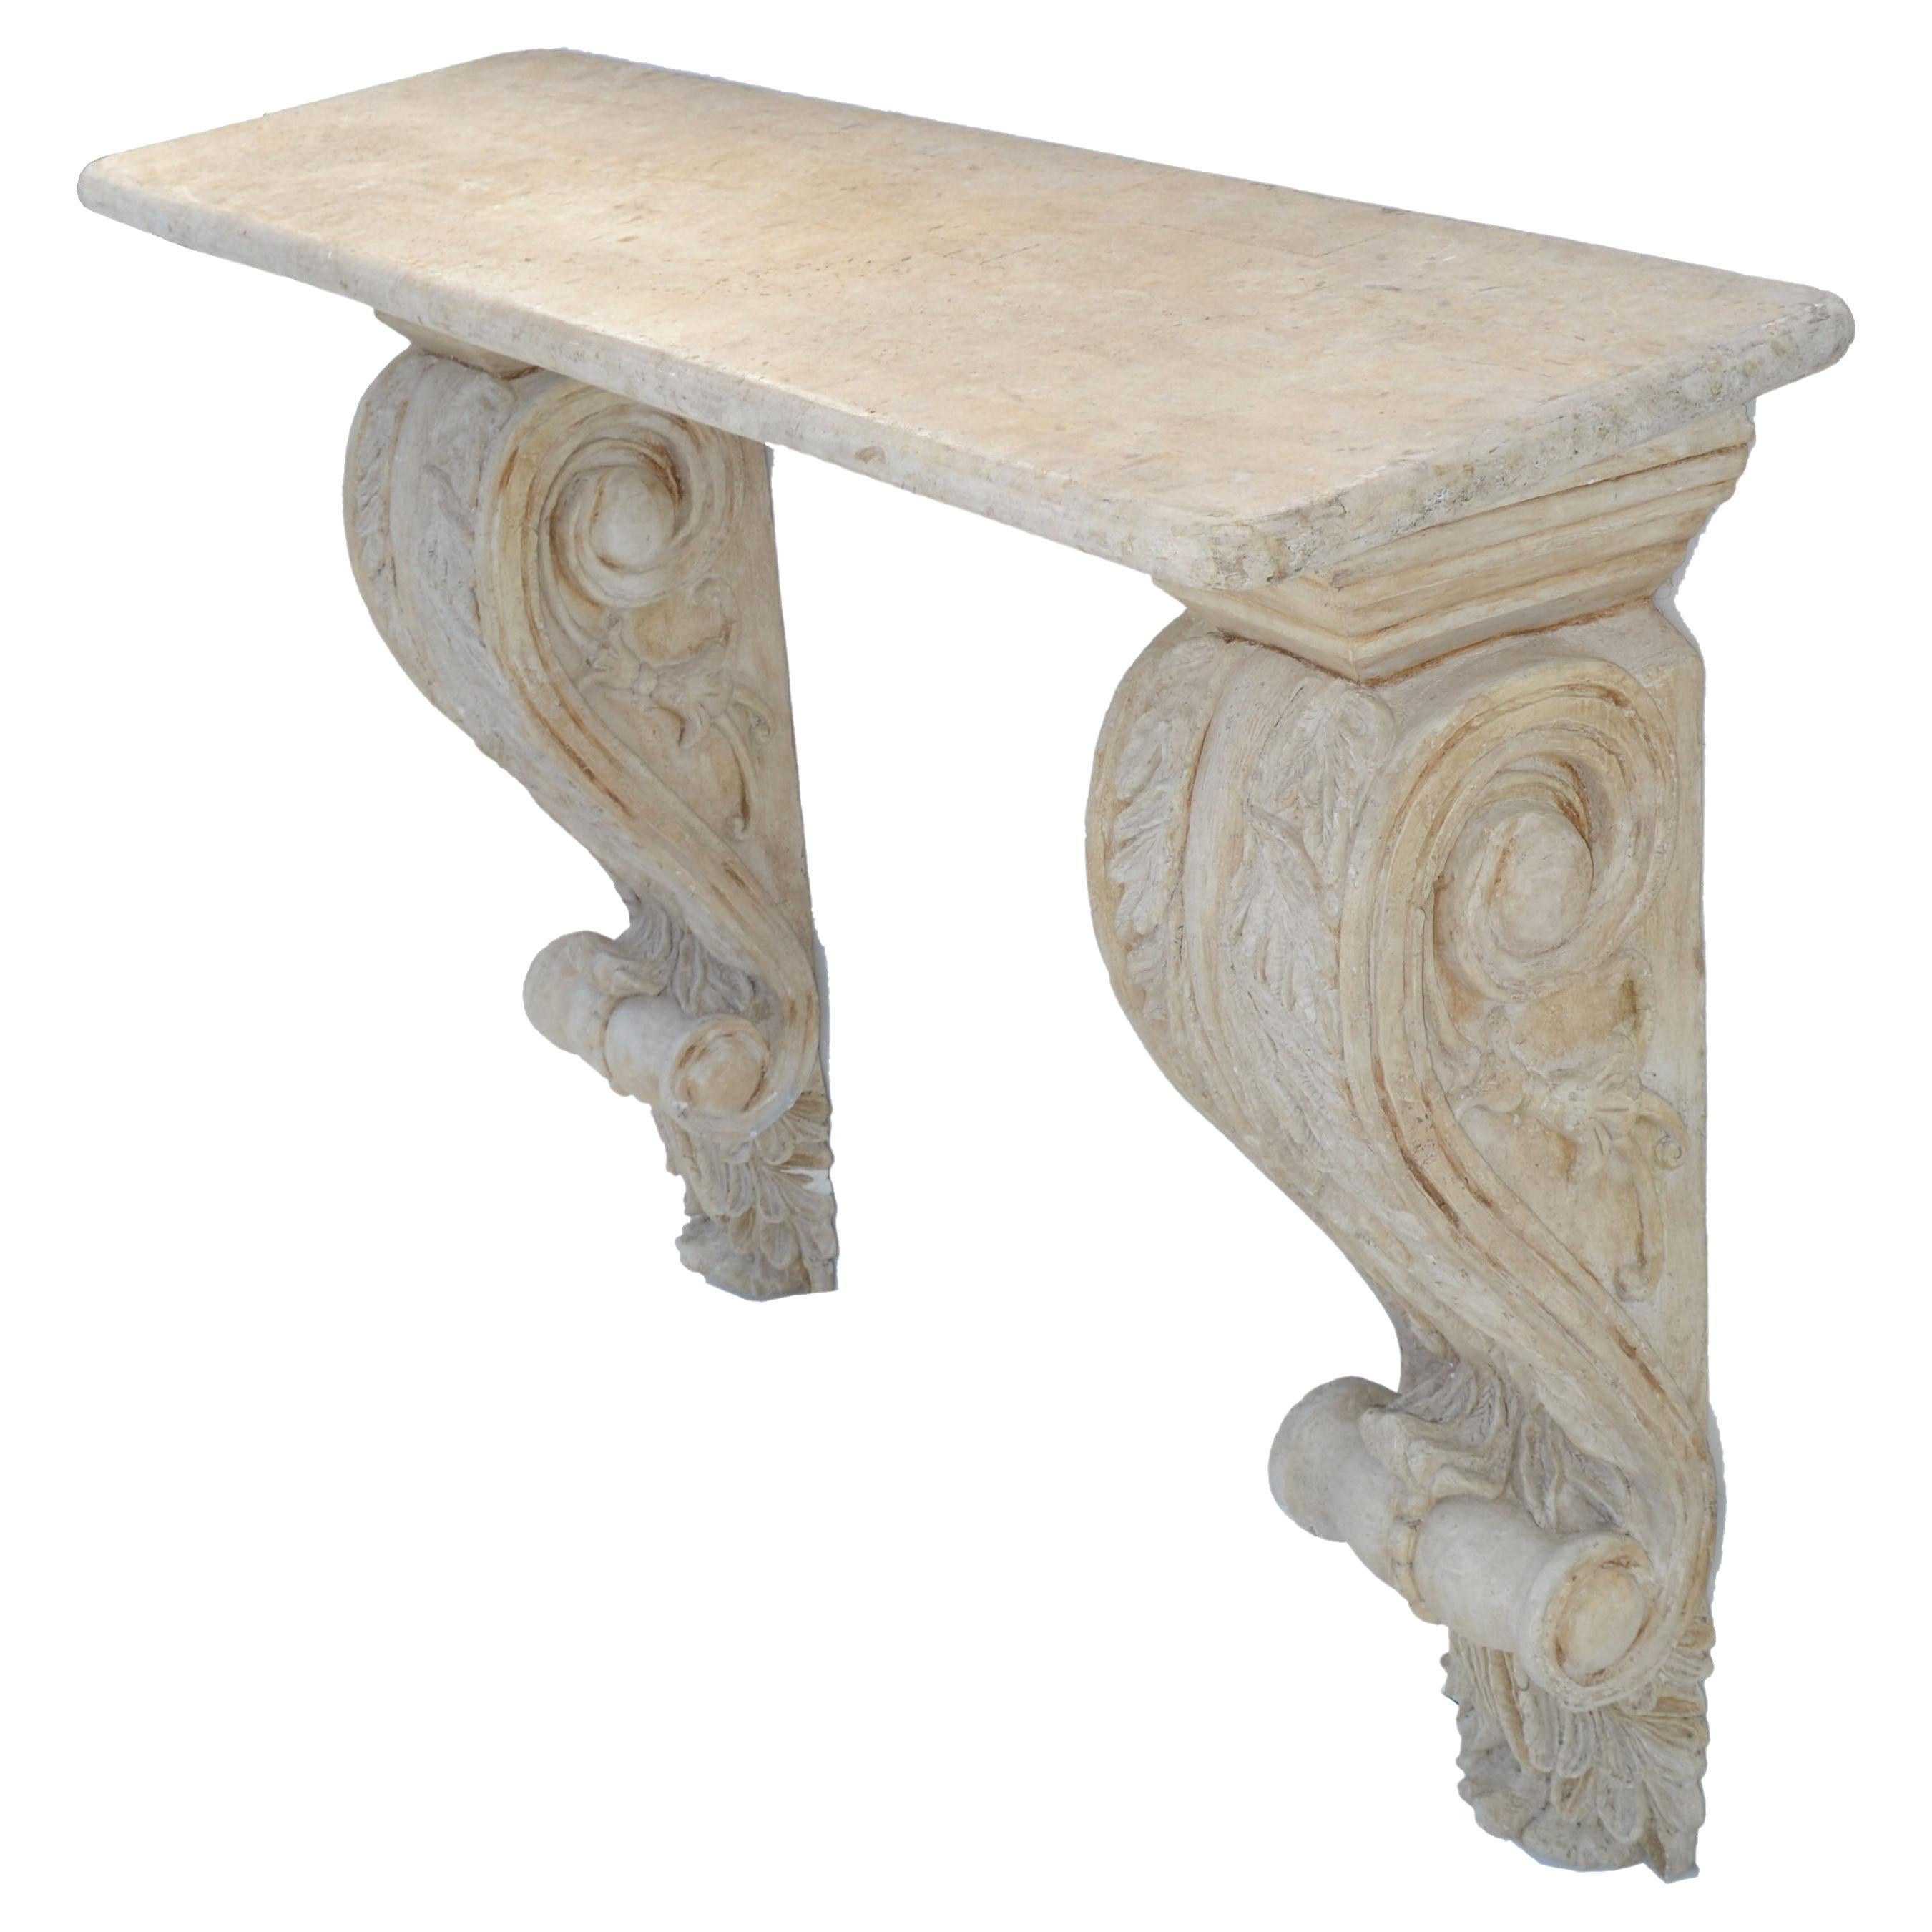 Large wall mounted console table or shelf in the style of Serge Roche made in France in the 1950.
Scrolled and hand carved wall brackets made out of Plaster holding the taupe color faux marble wood and stone top.
Mounting hardware included.
In